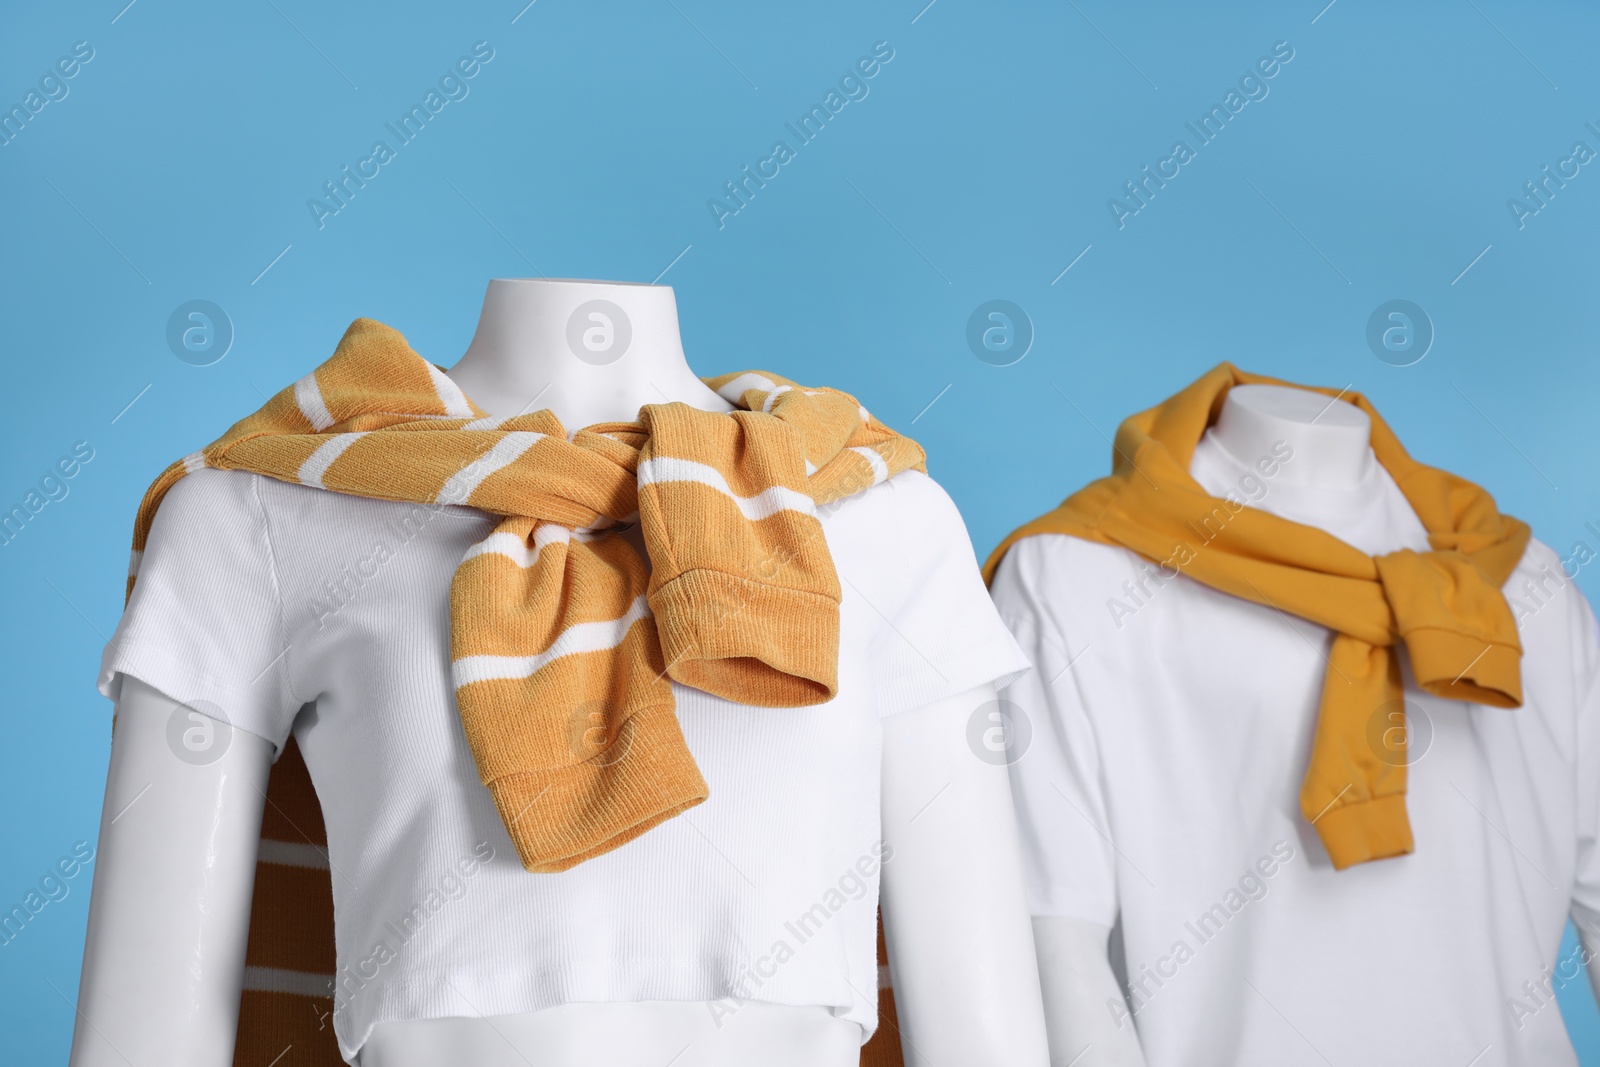 Photo of Female and male mannequins dressed in white t-shirts and orange sweaters on light blue background